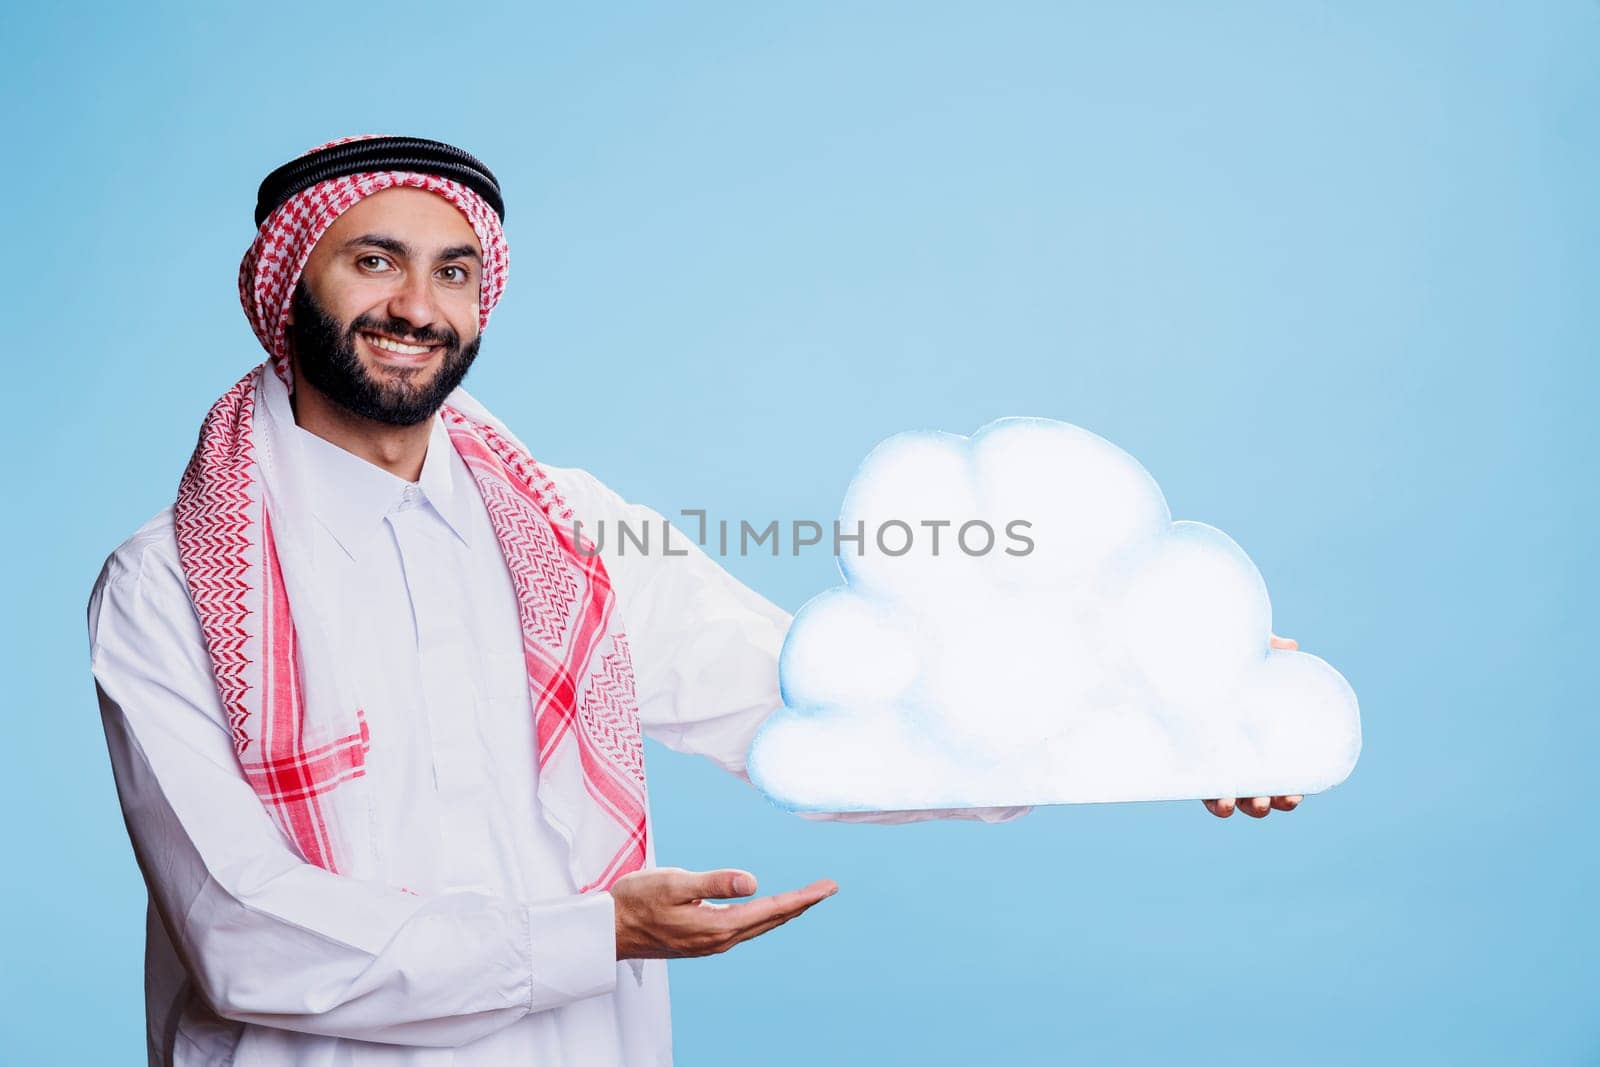 Carefree man wearing arabic traditional clothes posing with cloud shape cardboard banner studio portrait. Smiling muslim person holding showing white bubble and looking at camera